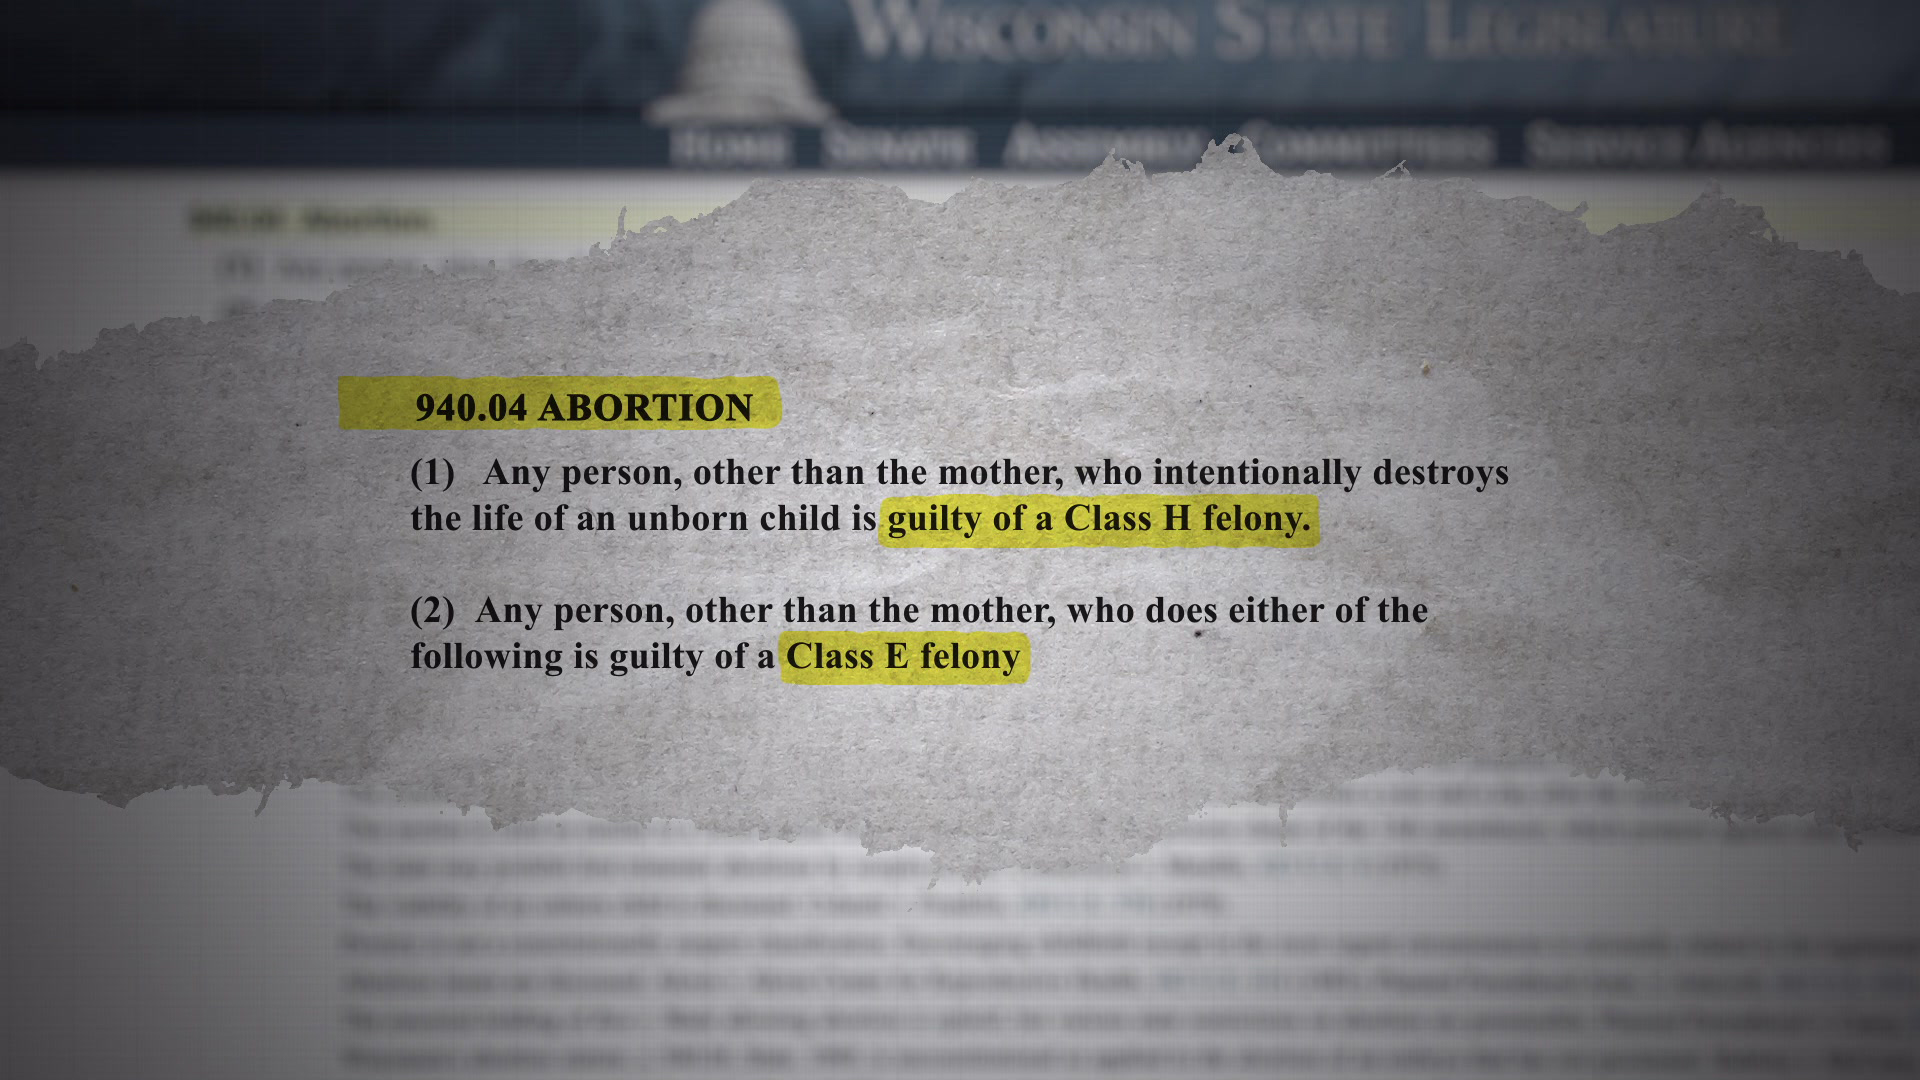 A graphic shows the text of Wisconsin Statute 940.04, which reads, "ABORTION: (1) Any person, other than the mother, who intentionally destroys the life of an unborn child is guilty of a Class H felony. (2) Any person, other than the mother ,who does either of the following is guilty of a Class E felony."